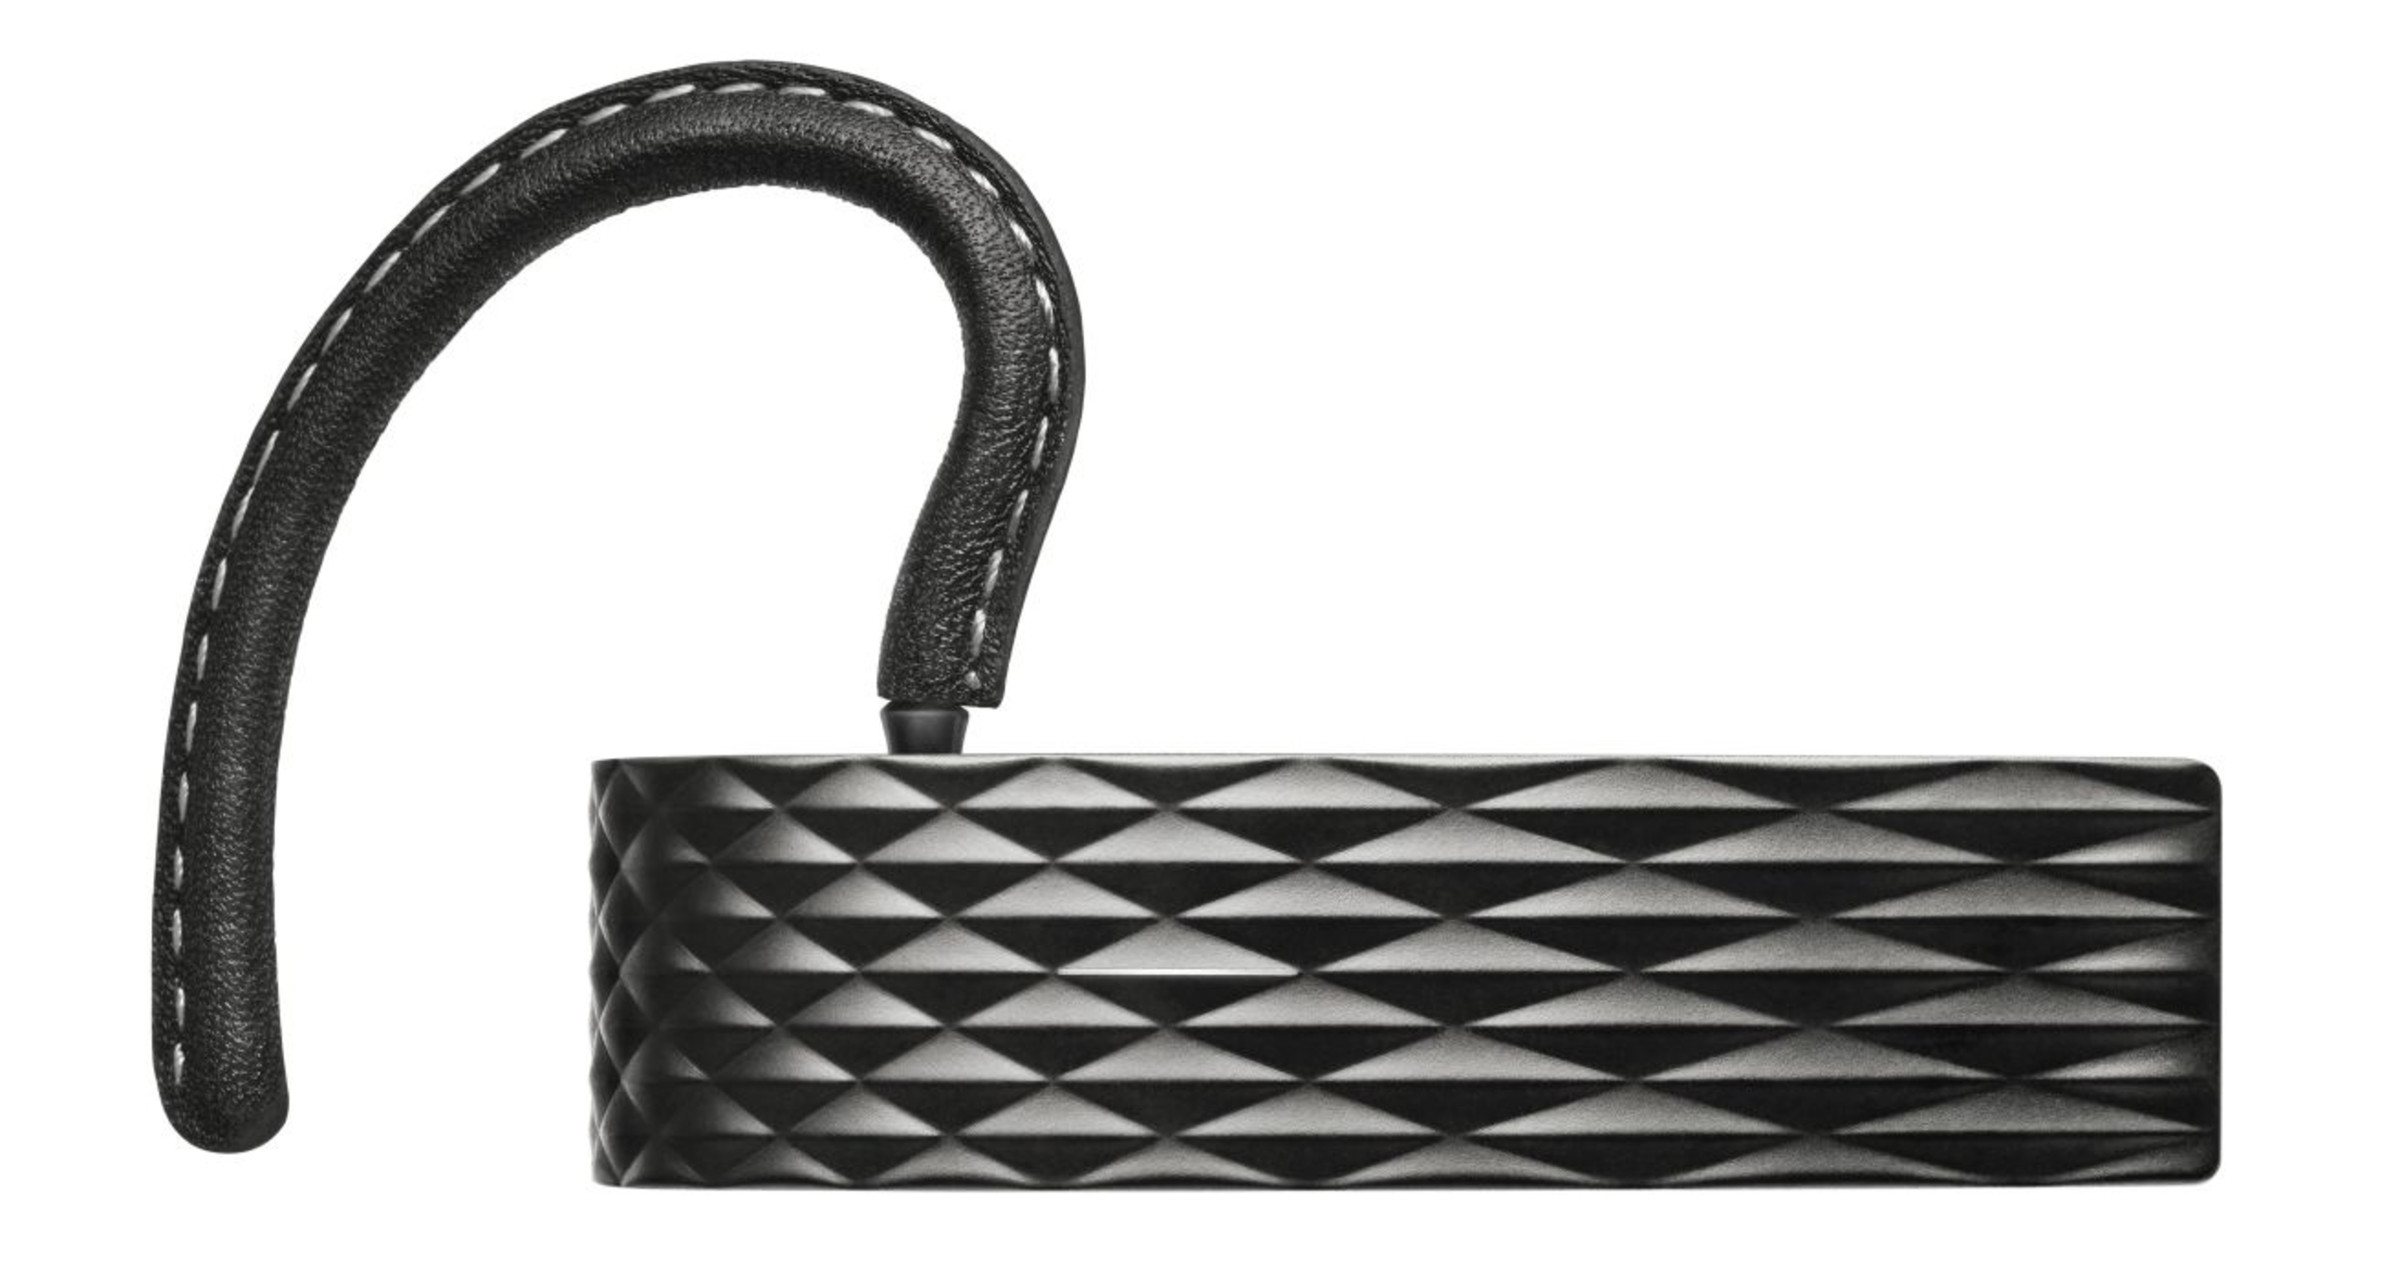 One of Jawbone’s recognizable Bluetooth earpieces.